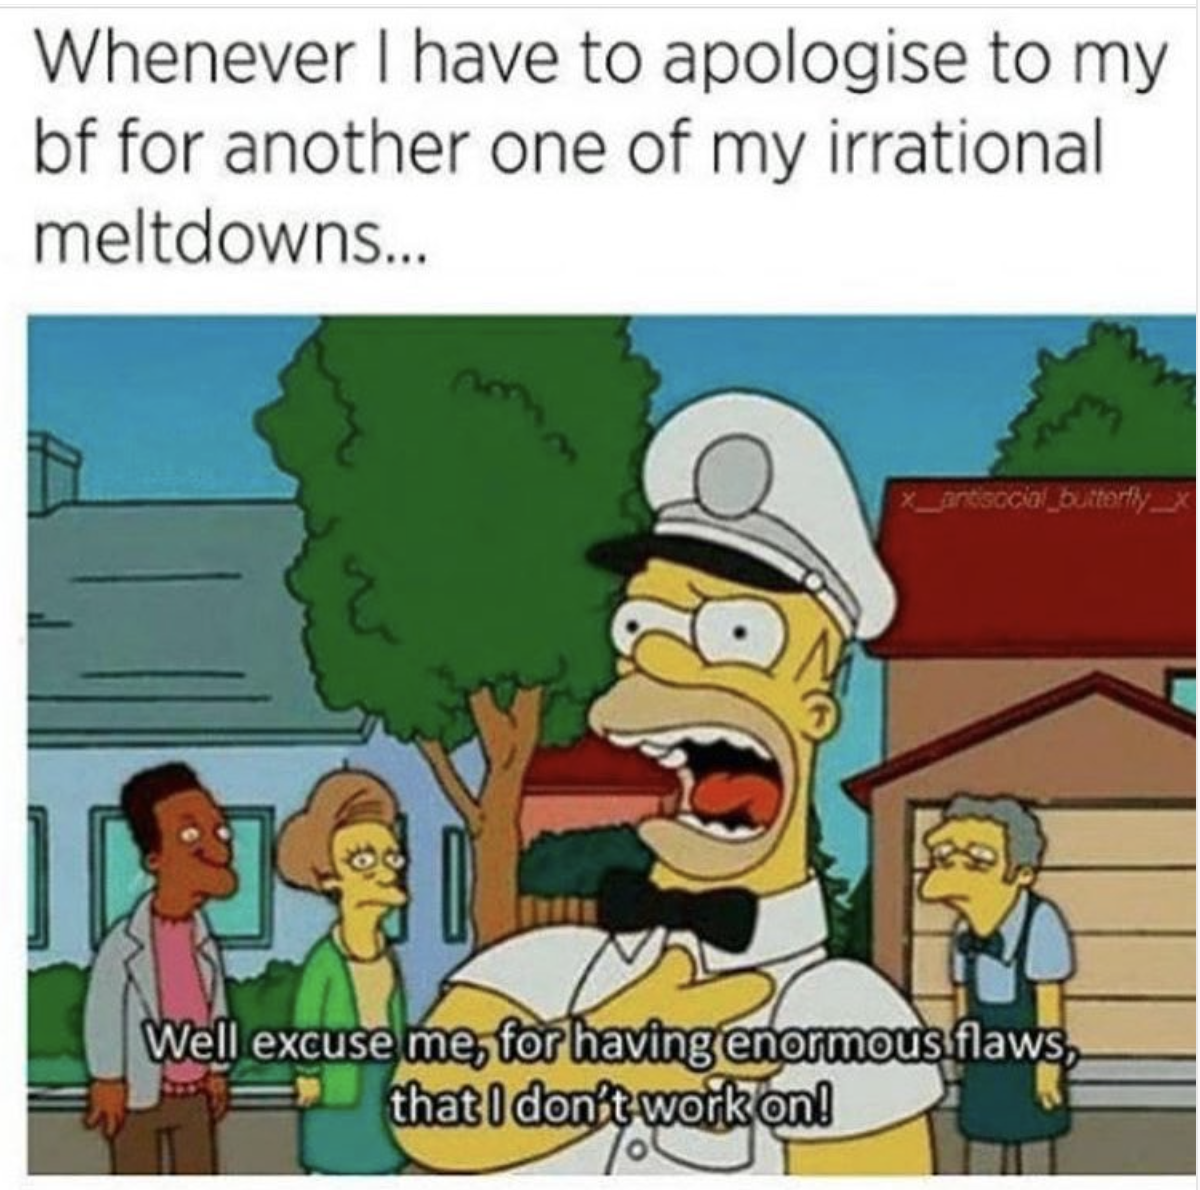 memes - boyfriend mad at me meme - Whenever I have to apologise to my bf for another one of my irrational meltdowns... Well excuse me, for having enormous flaws, that I don't work on!